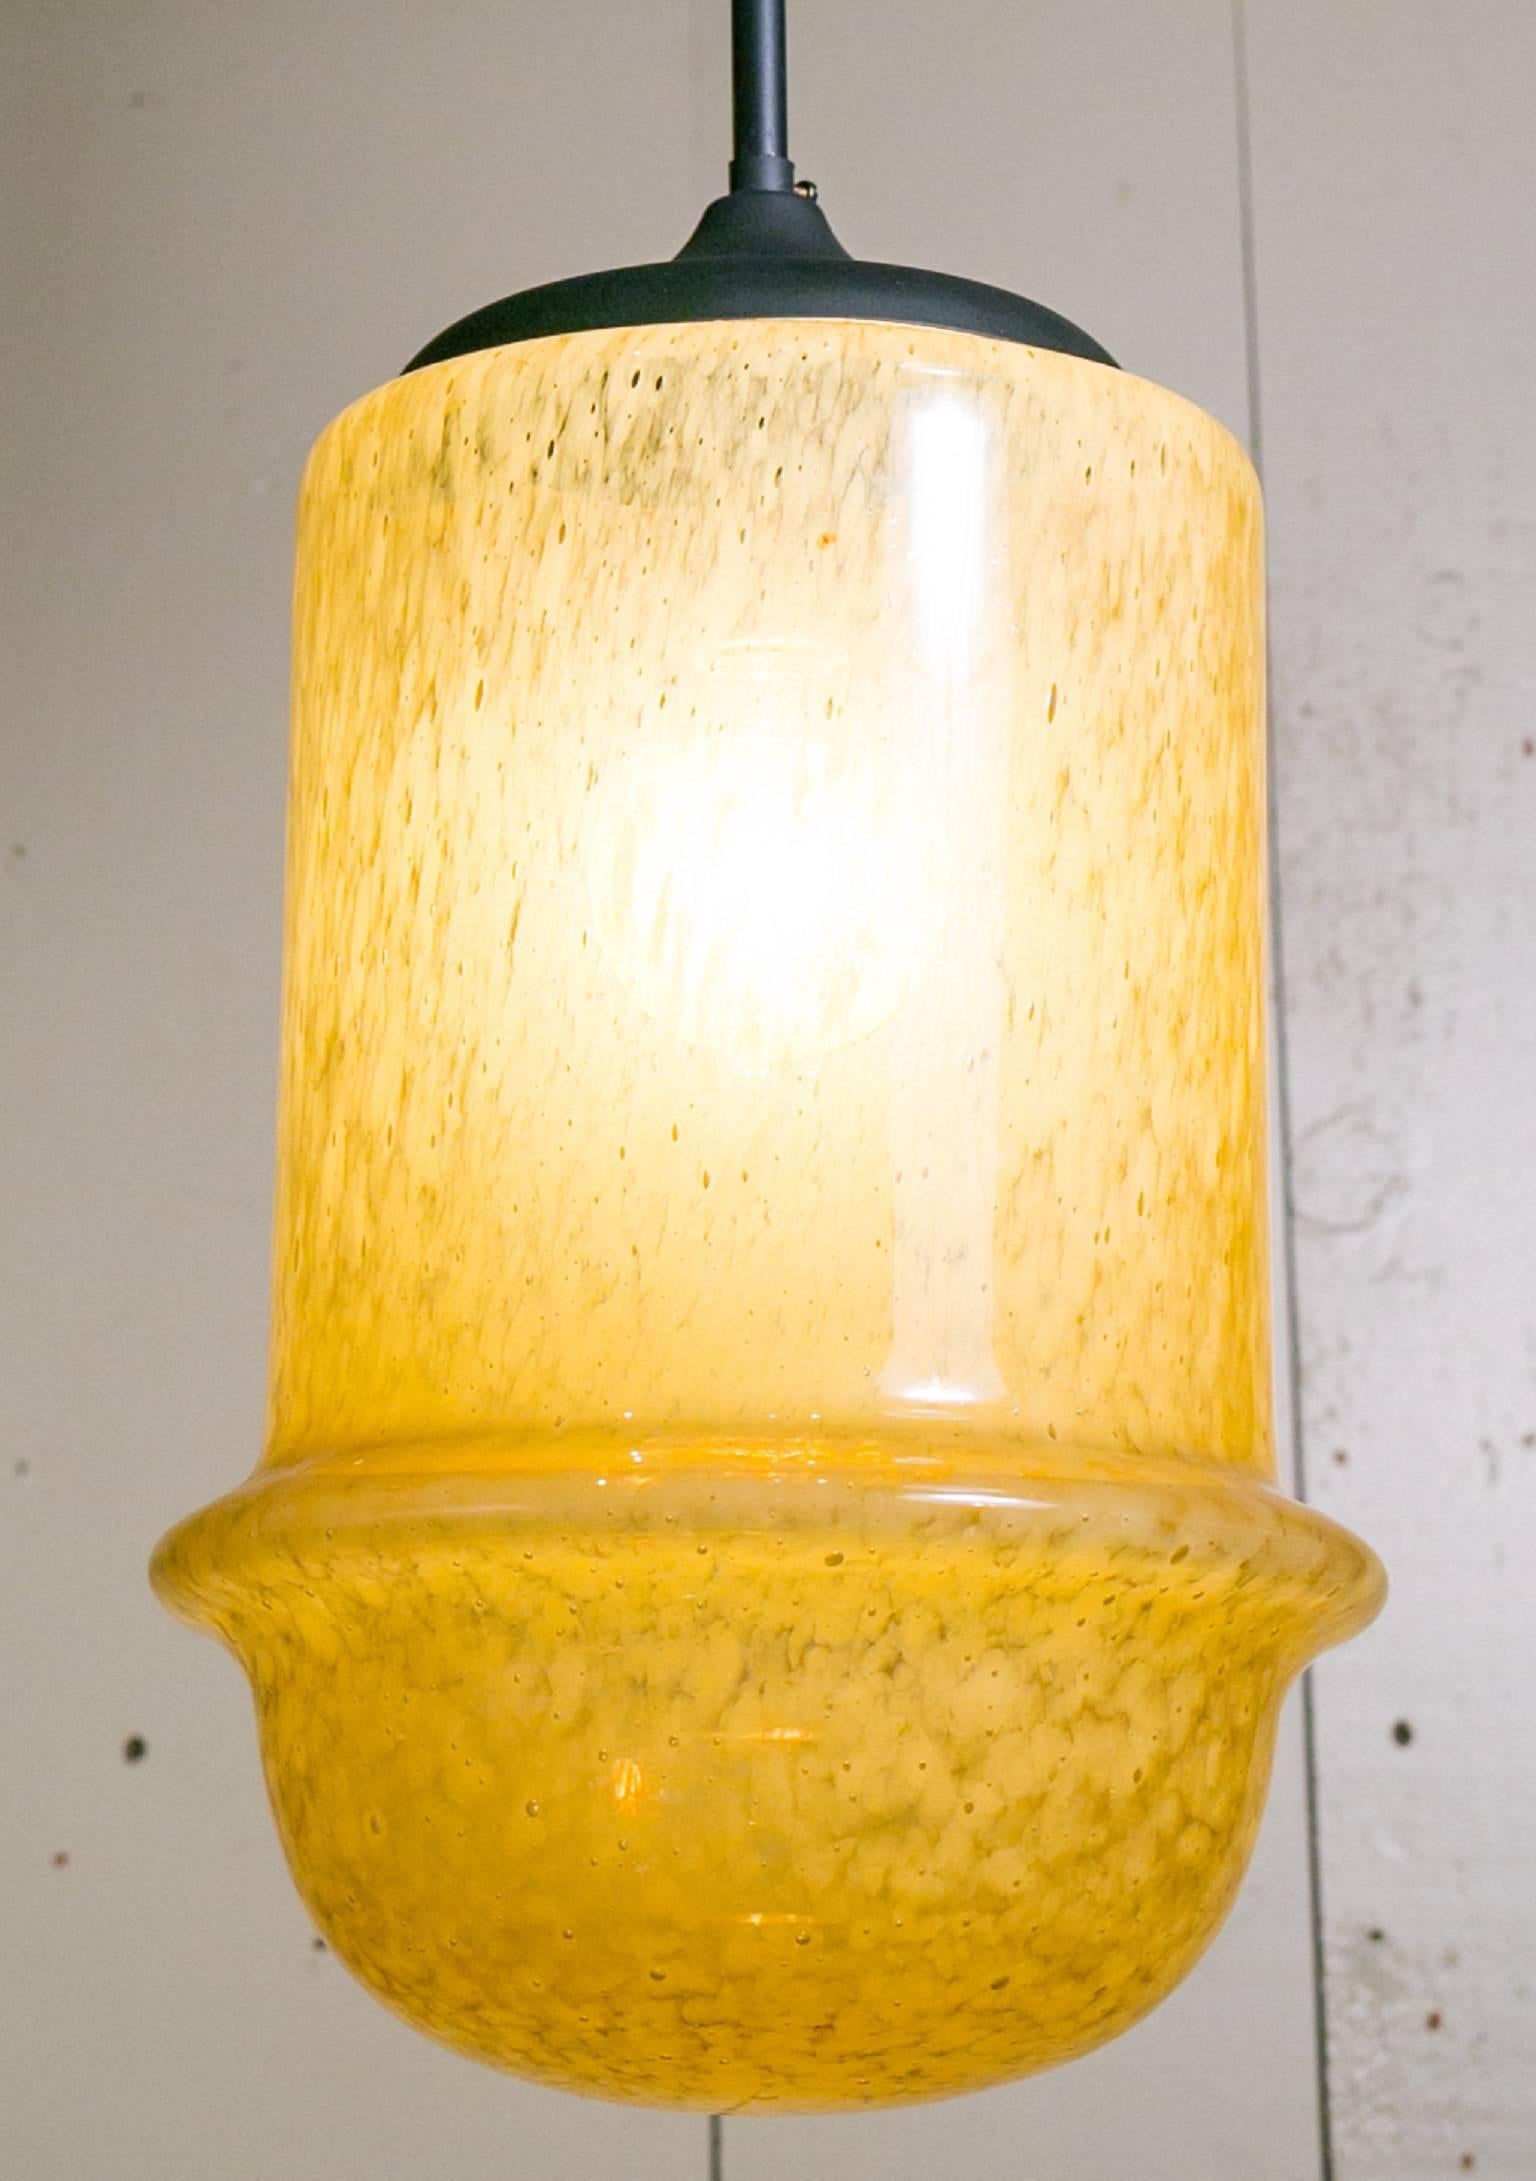 Mid-Century Modern yellow hand-blown glass light by Mazzega.  Interesting speckled color variations in the glass.  Glass dome rests on a on dark painted
metal rod with one porcelain Edison Socket.  Can take up to a 100 watt bulb. Newly rewired in